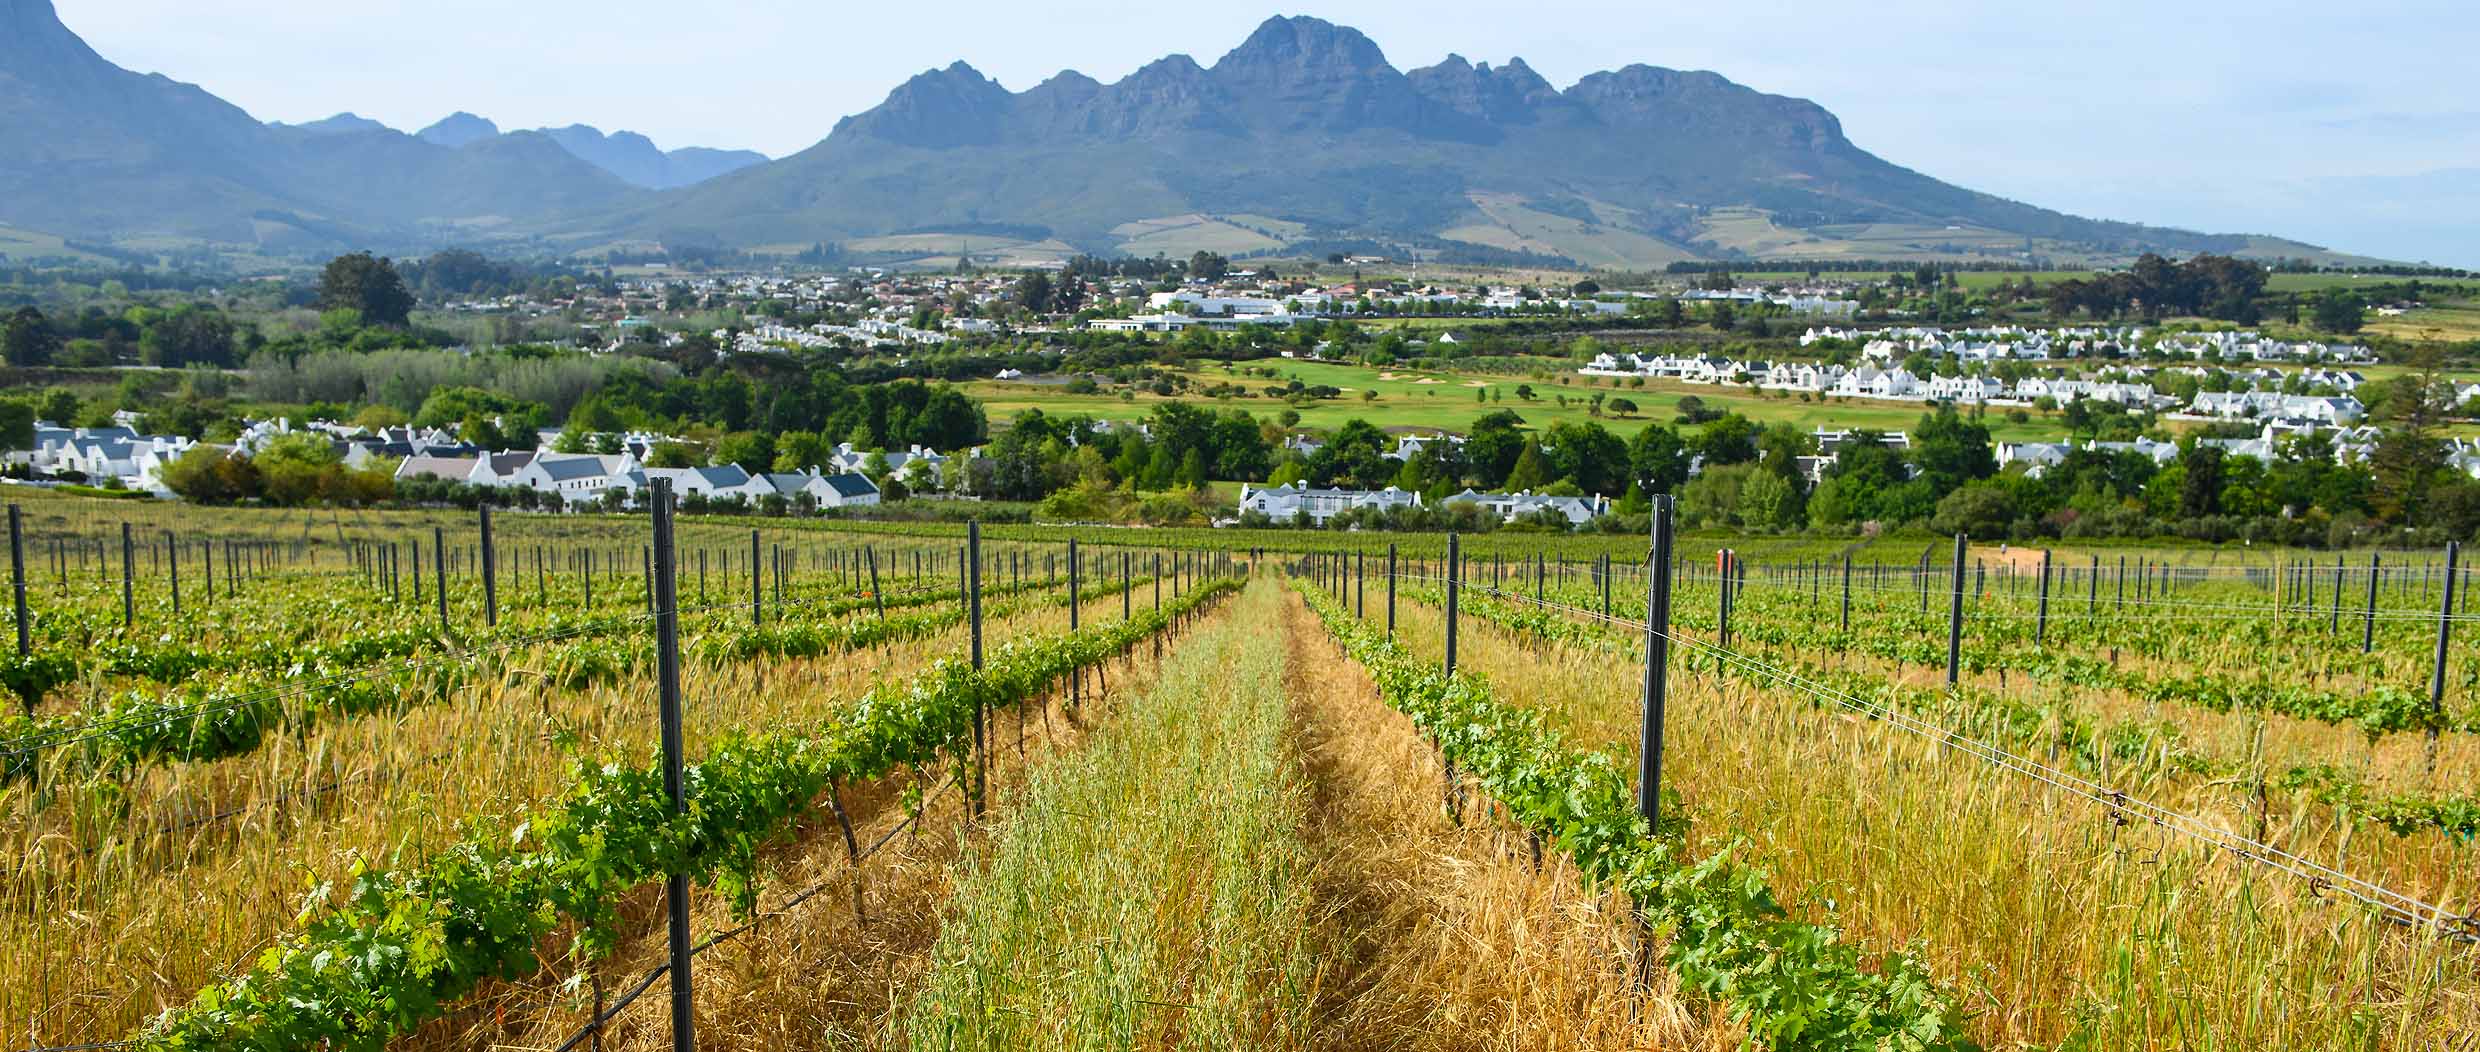 Looking down a gentle slope of low vines with high grasses growing up between the rows, there are low white buildings in the middle distance of a green valley floor with trees dotted around, and in the background are mountains of the Stellenbosch, South Africa